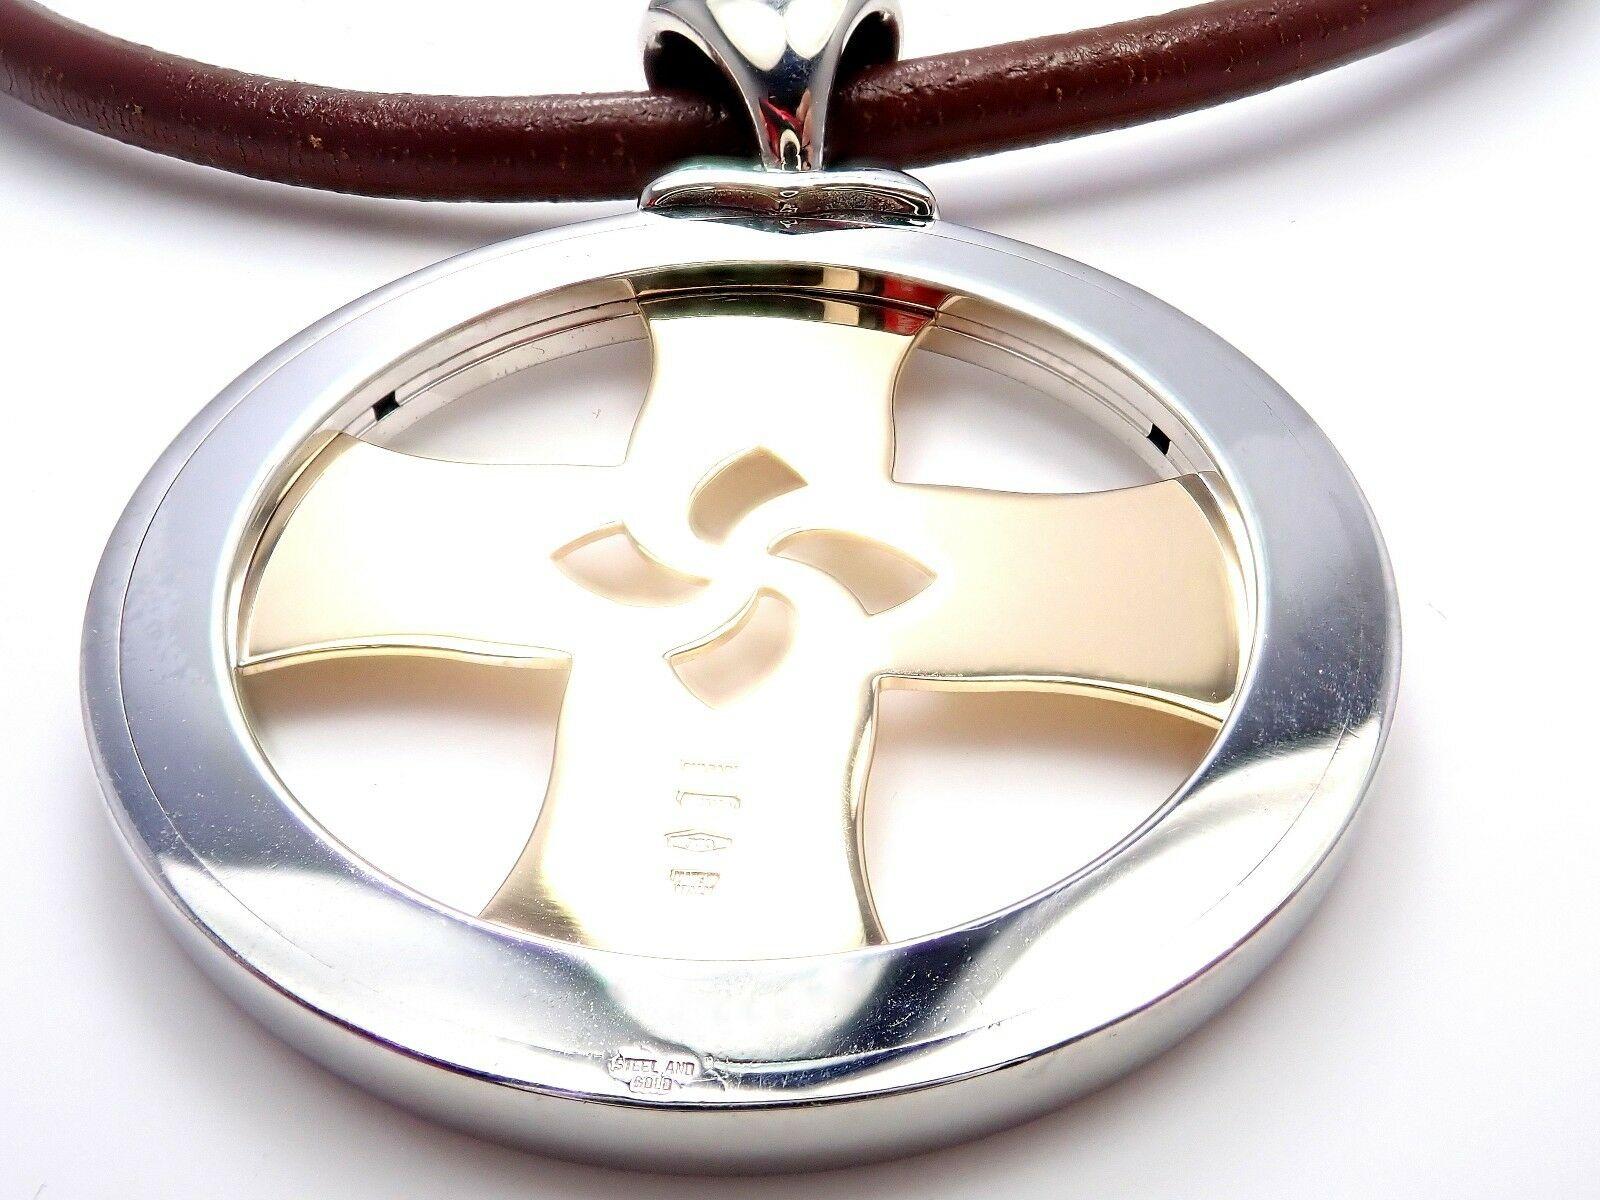 18k yellow gold and stainless steel Tondo Cross pendant necklace by Bulgari.
Details:
Leather Length: 17